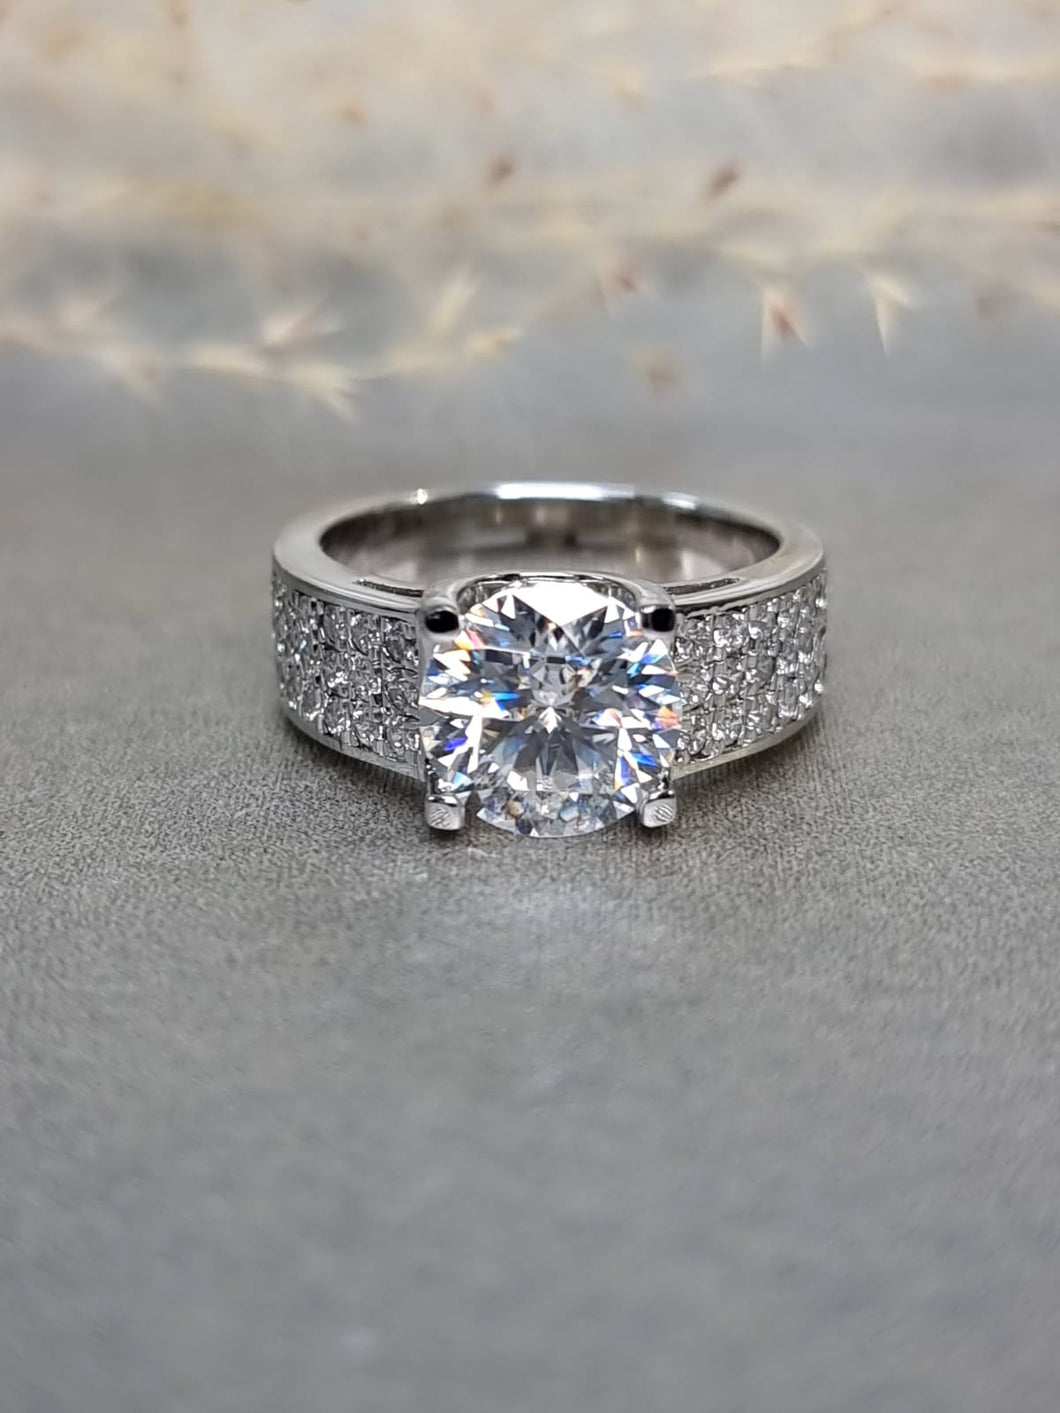 3.00ct Round Brilliant Cut Moissanite Diamond With Broad Band Ring